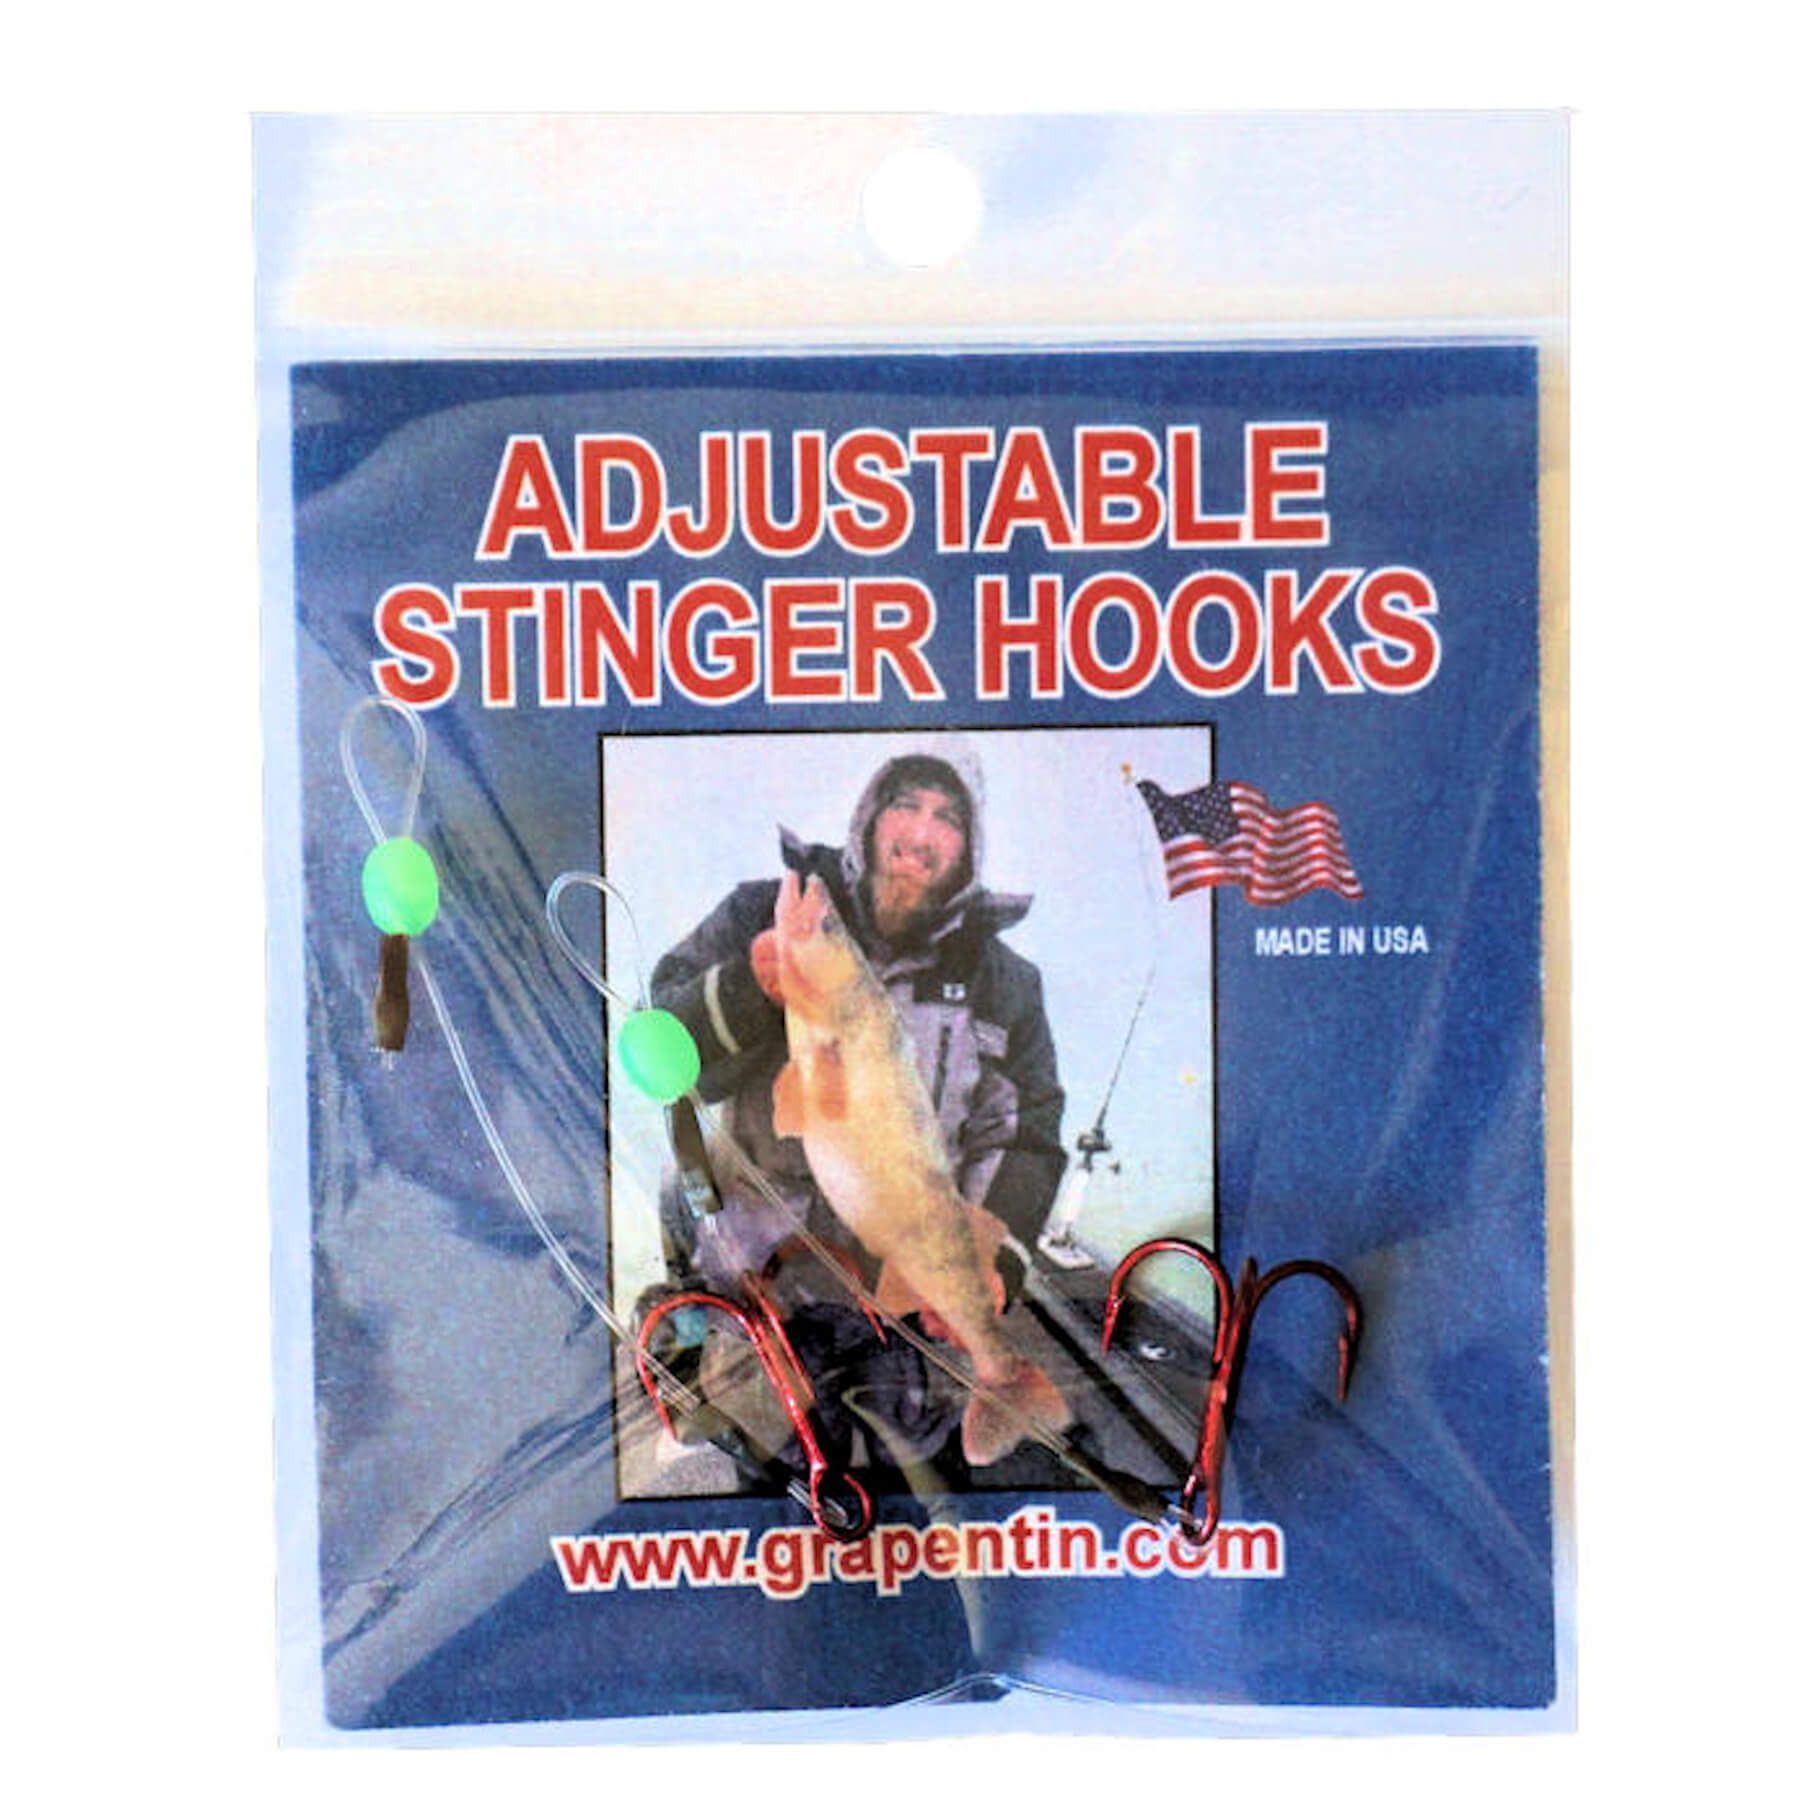 Optimum Baits - The Zappu Hitch Hook allows you to add a stinger